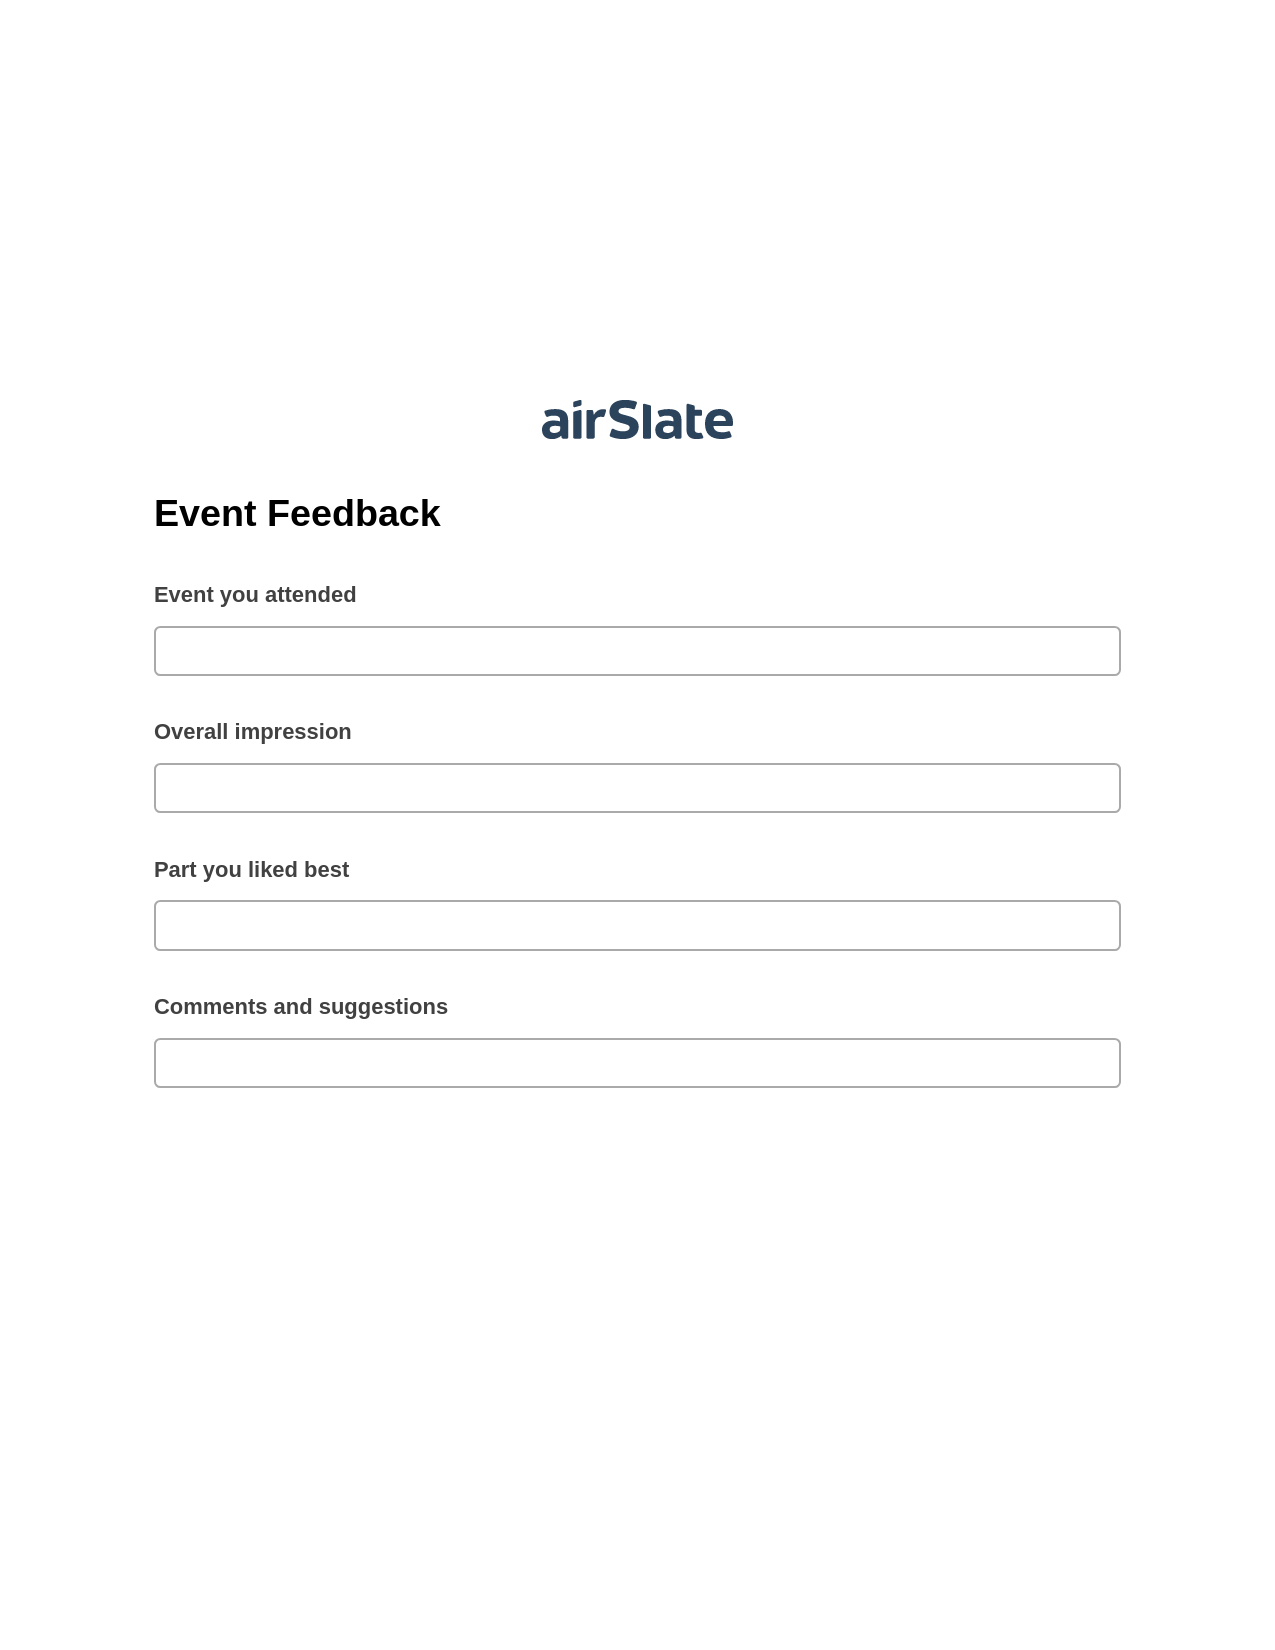 Event Feedback Pre-fill from CSV File Bot, Create MS Dynamics 365 Records Bot, Export to NetSuite Record Bot